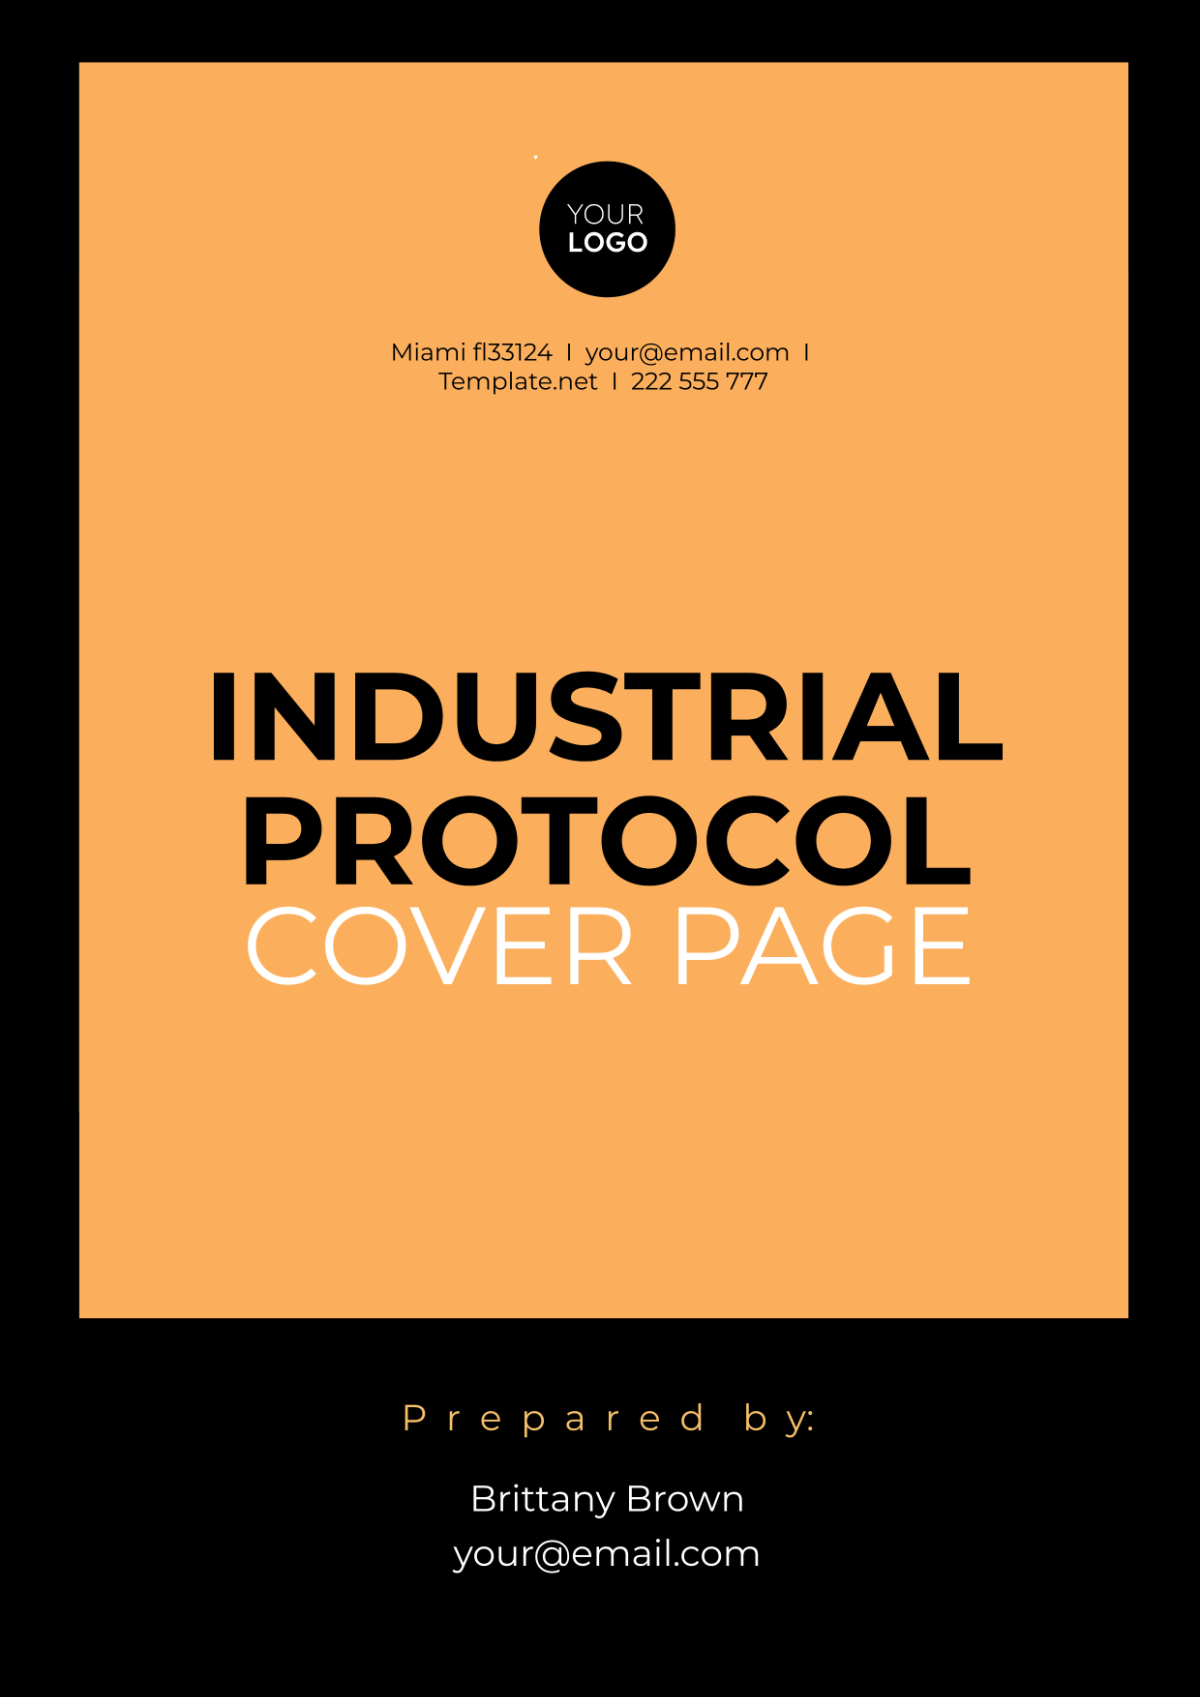 Industrial Protocol Cover Page Template